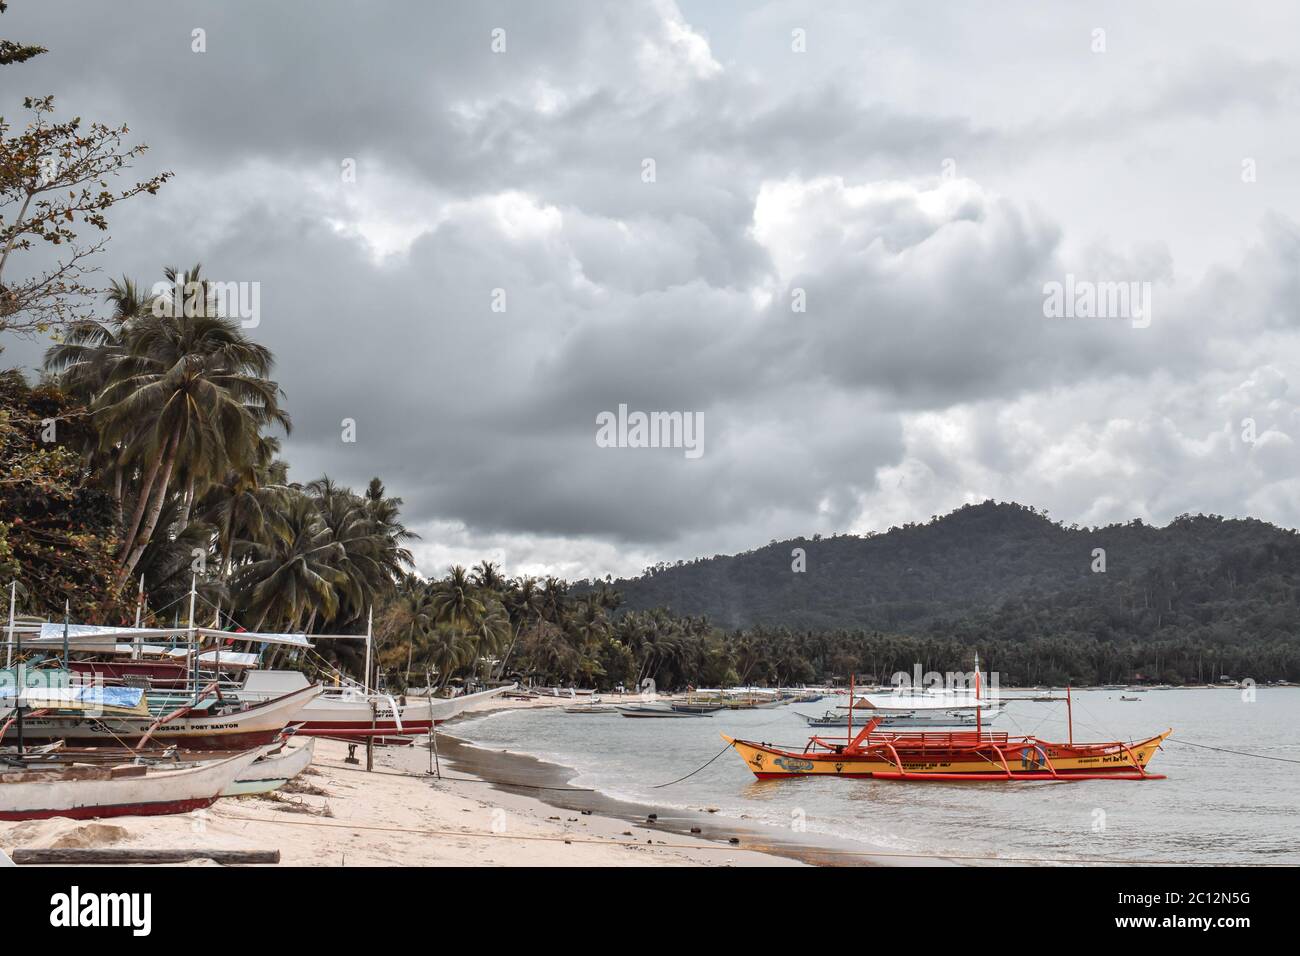 Traditional Philippine fisherman boats docked on a beach in a lagoon in Port Barton Palawan Island the Philippines before a storm Stock Photo